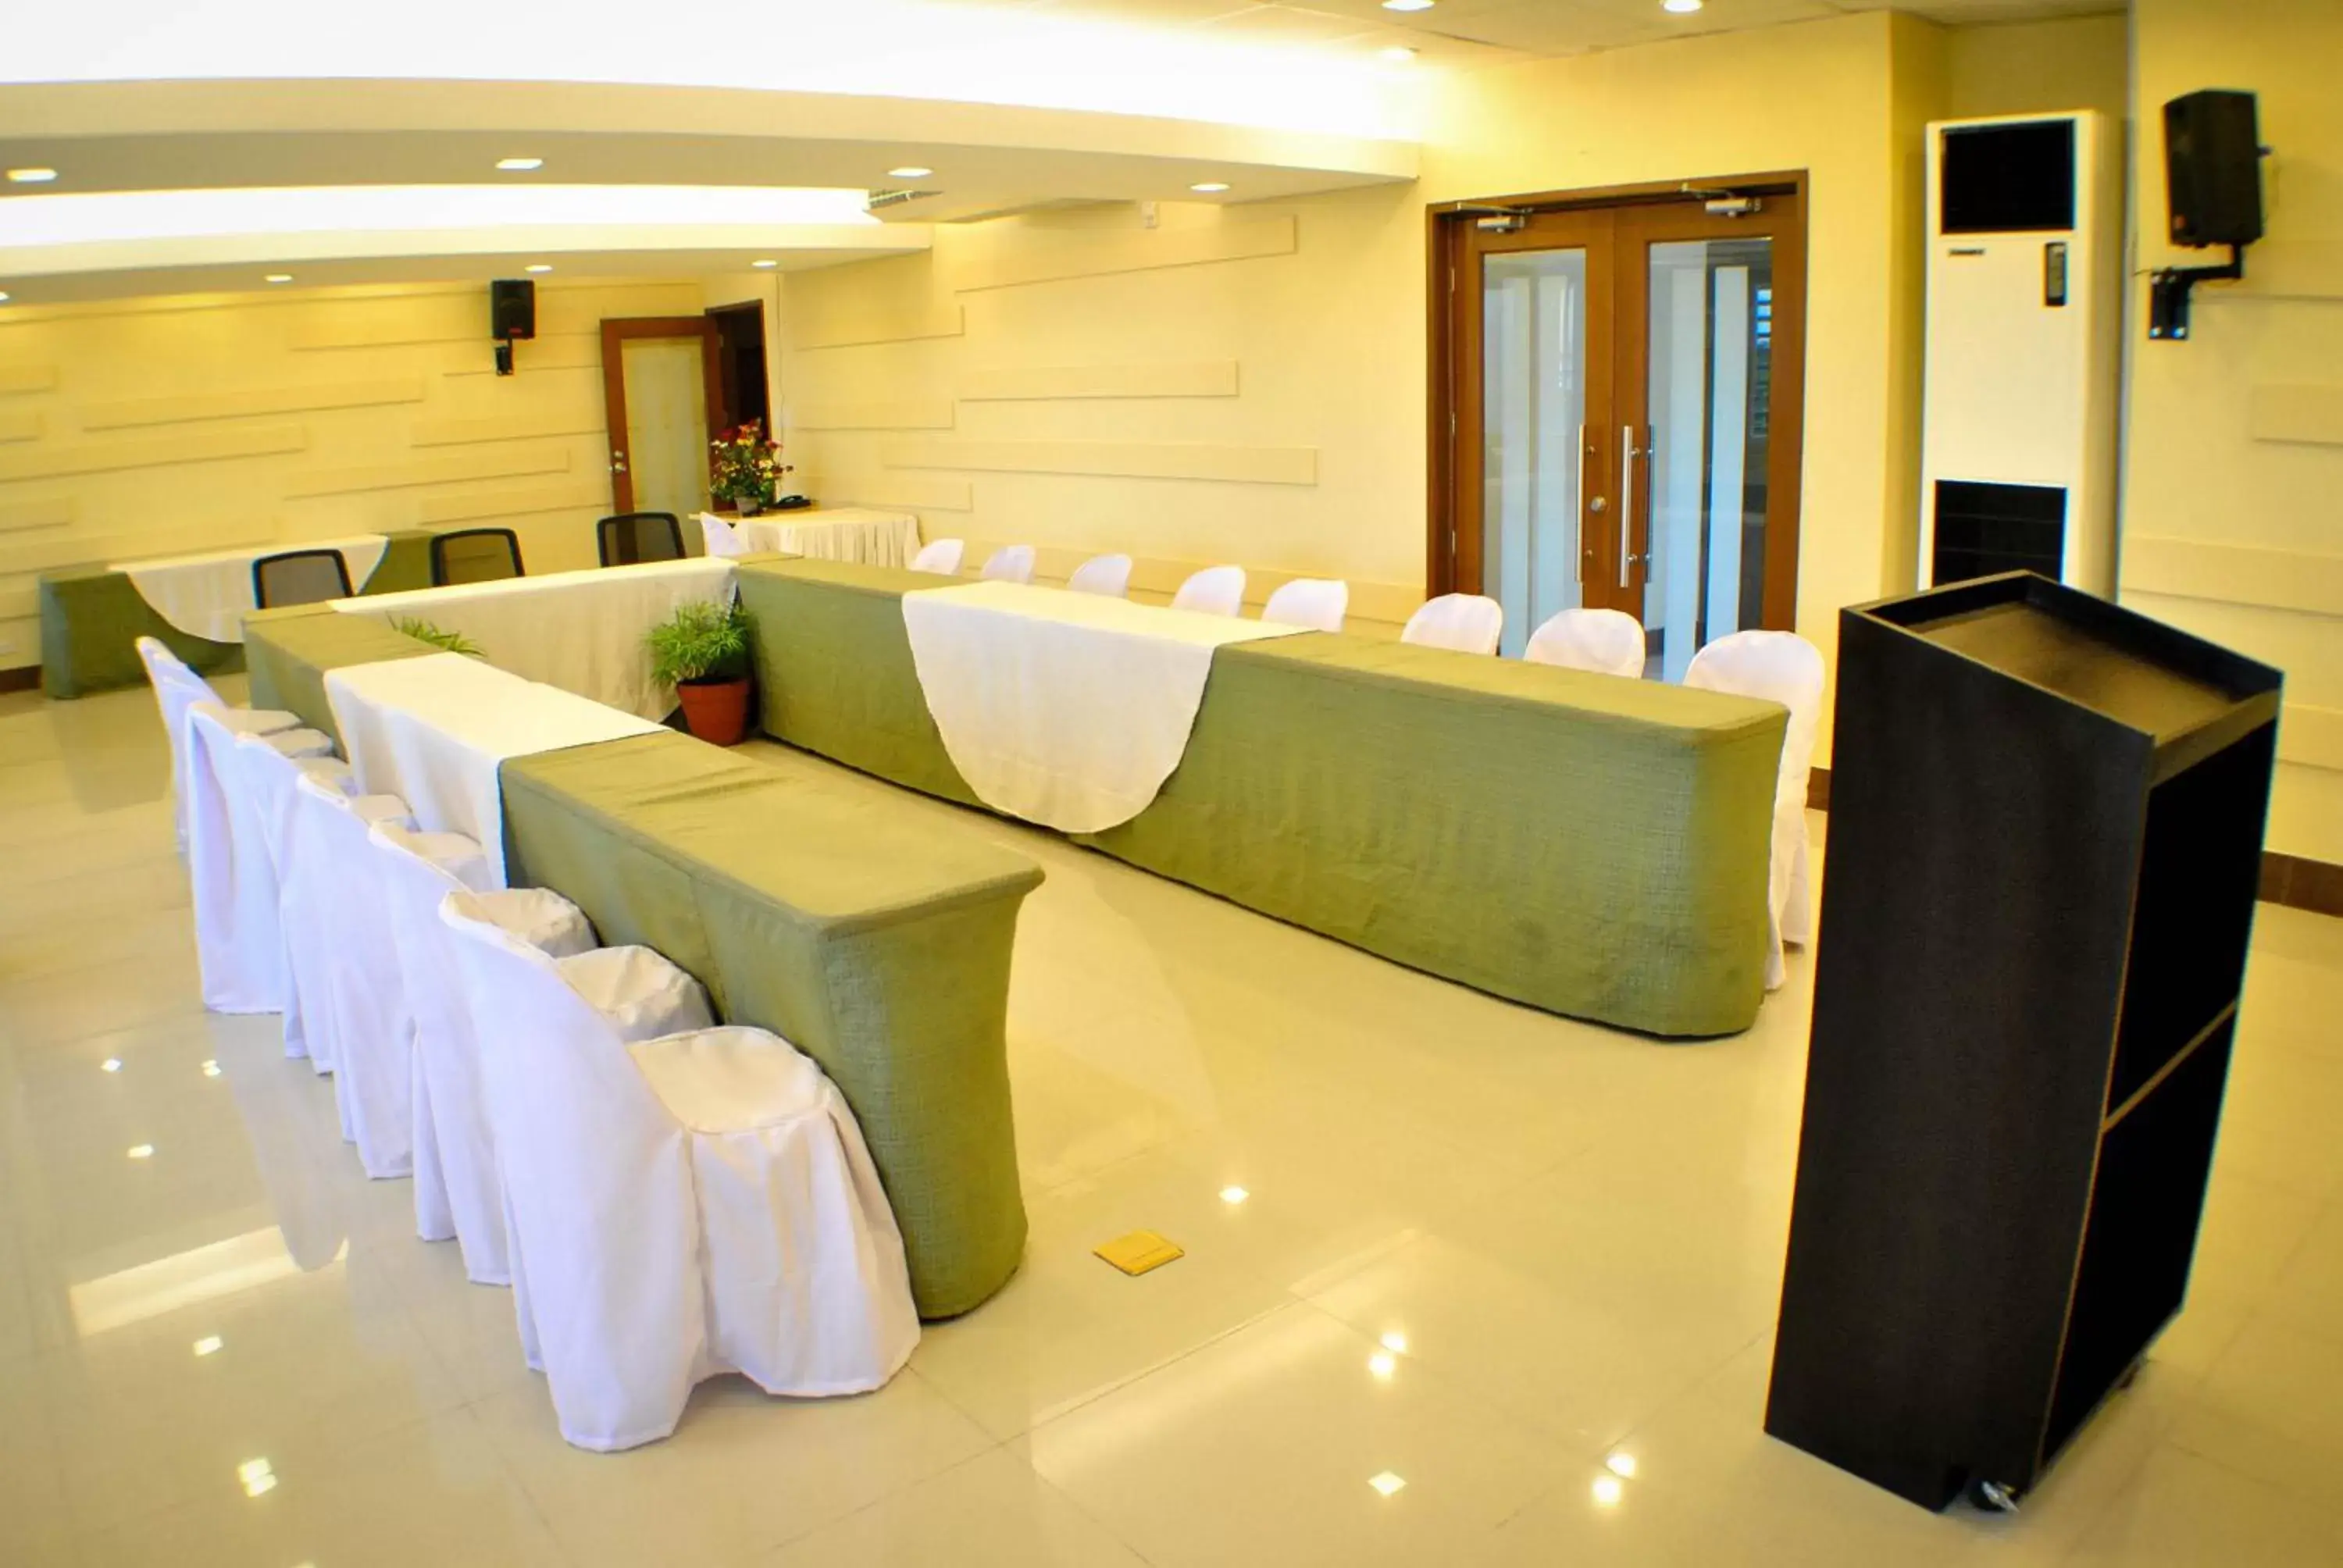 Meeting/conference room, Banquet Facilities in Fersal Hotel Kalayaan, Quezon City